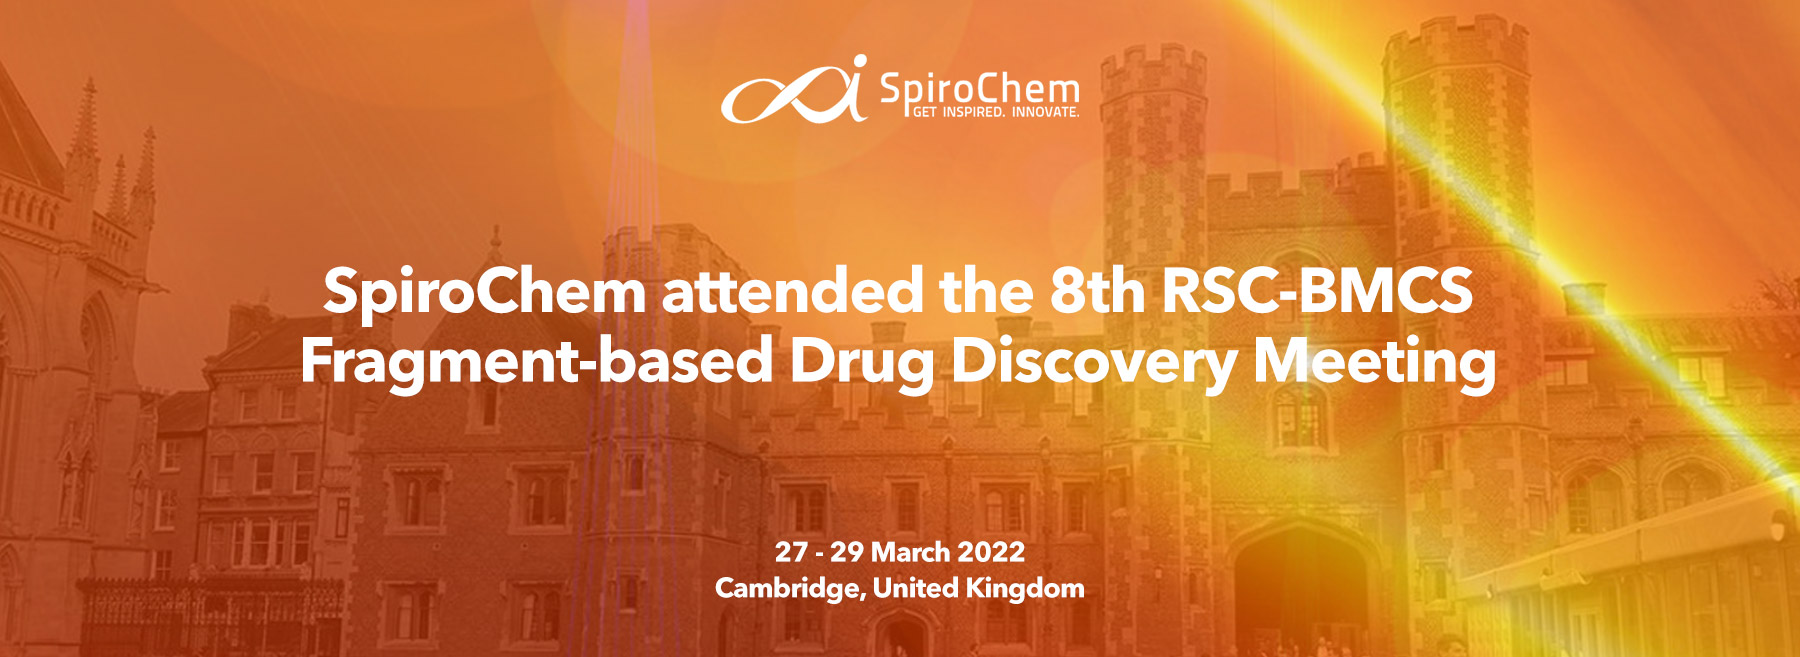 SpiroChem’s representatives exhibited at the 8th RSC-BMCS Fragment-based Drug Discovery Meeting, in Cambridge, UK.